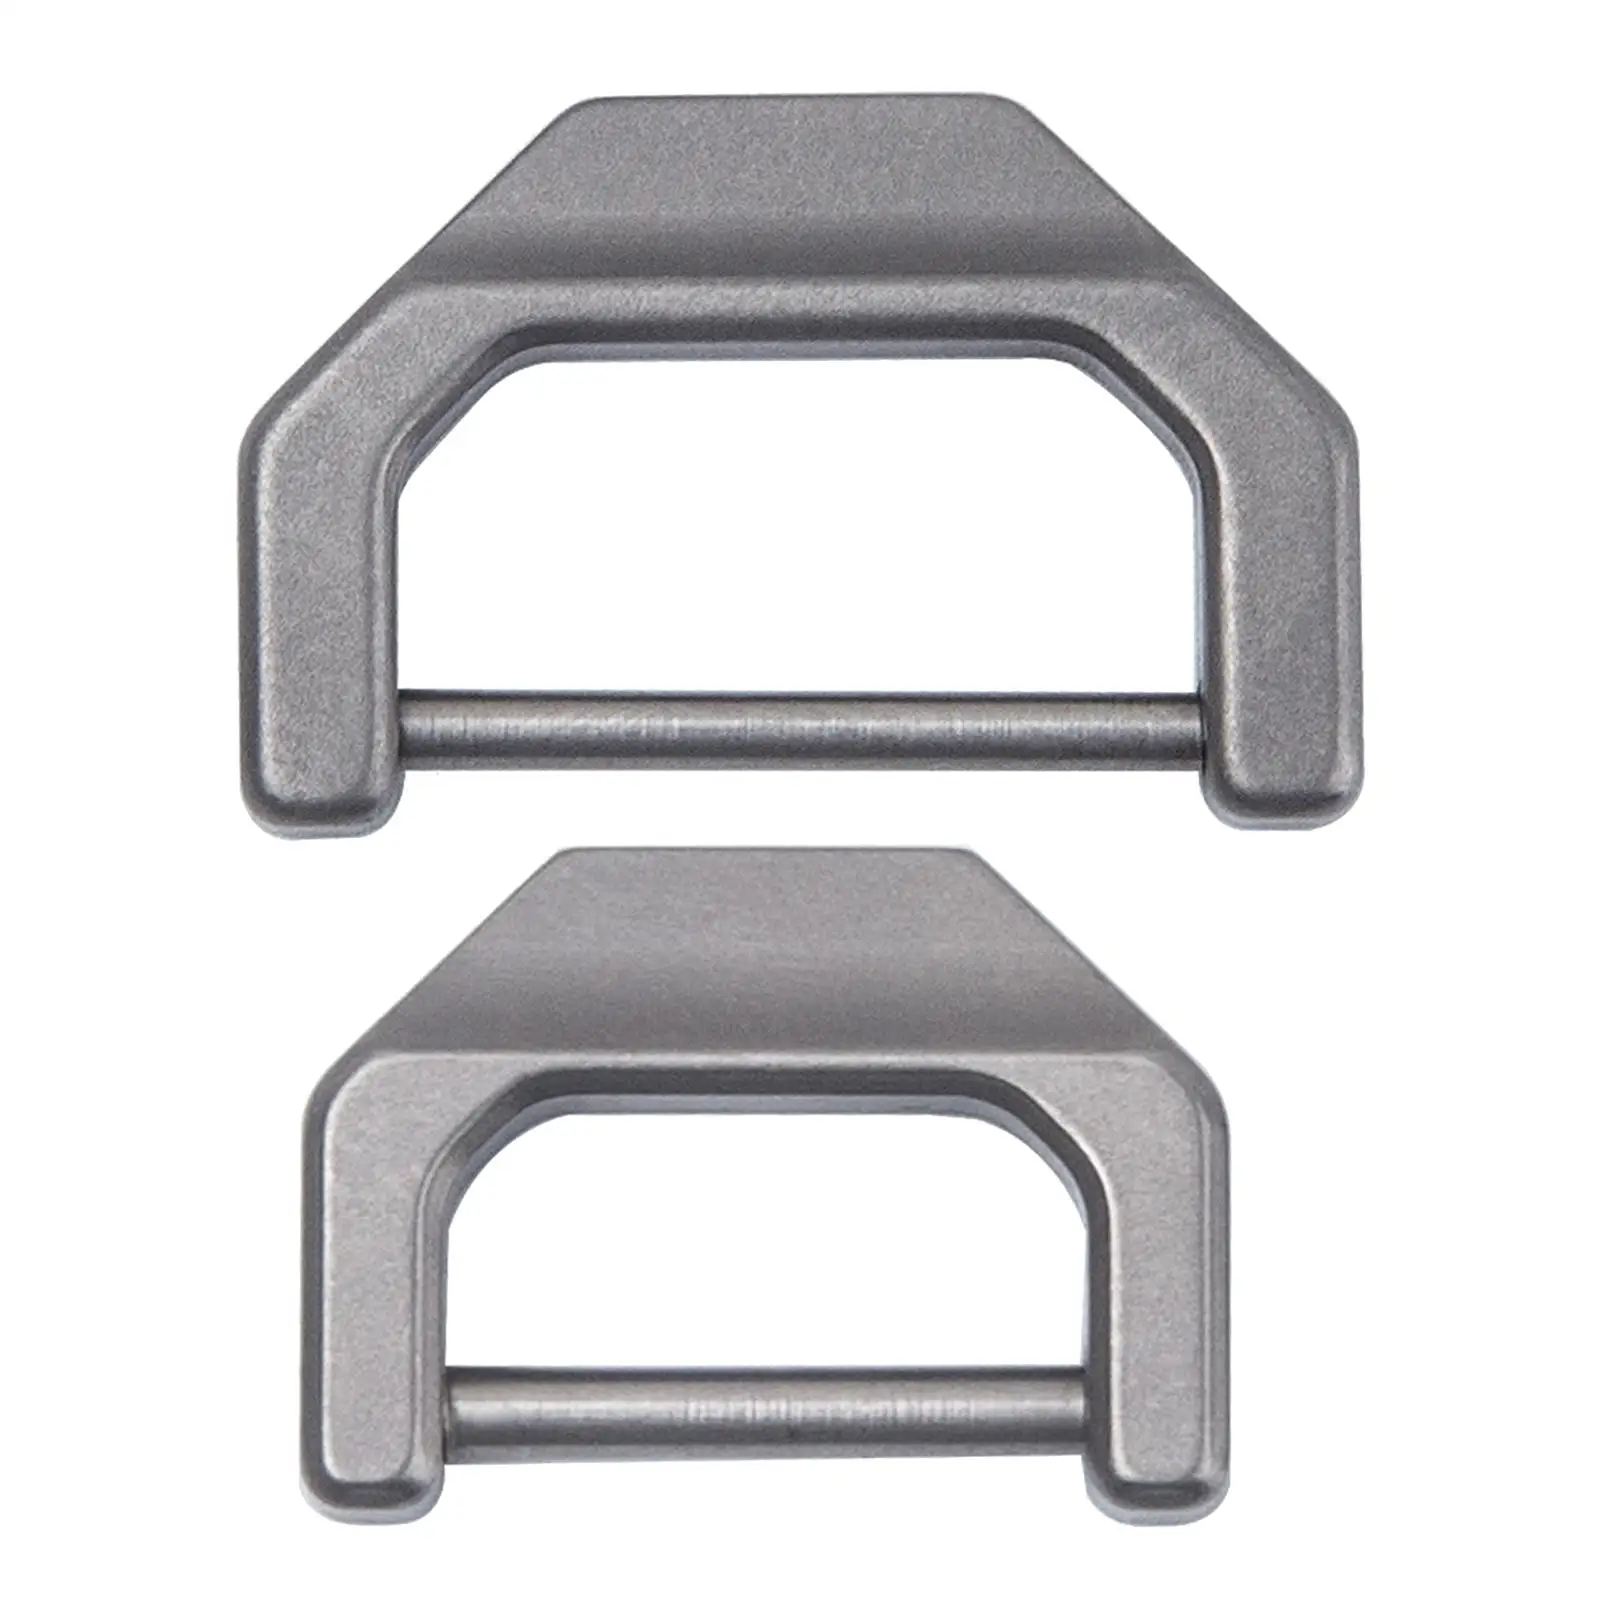 Titanium Alloy Key Ring Car Key Tool Shackle Small D Rings for Backpack Outdoor